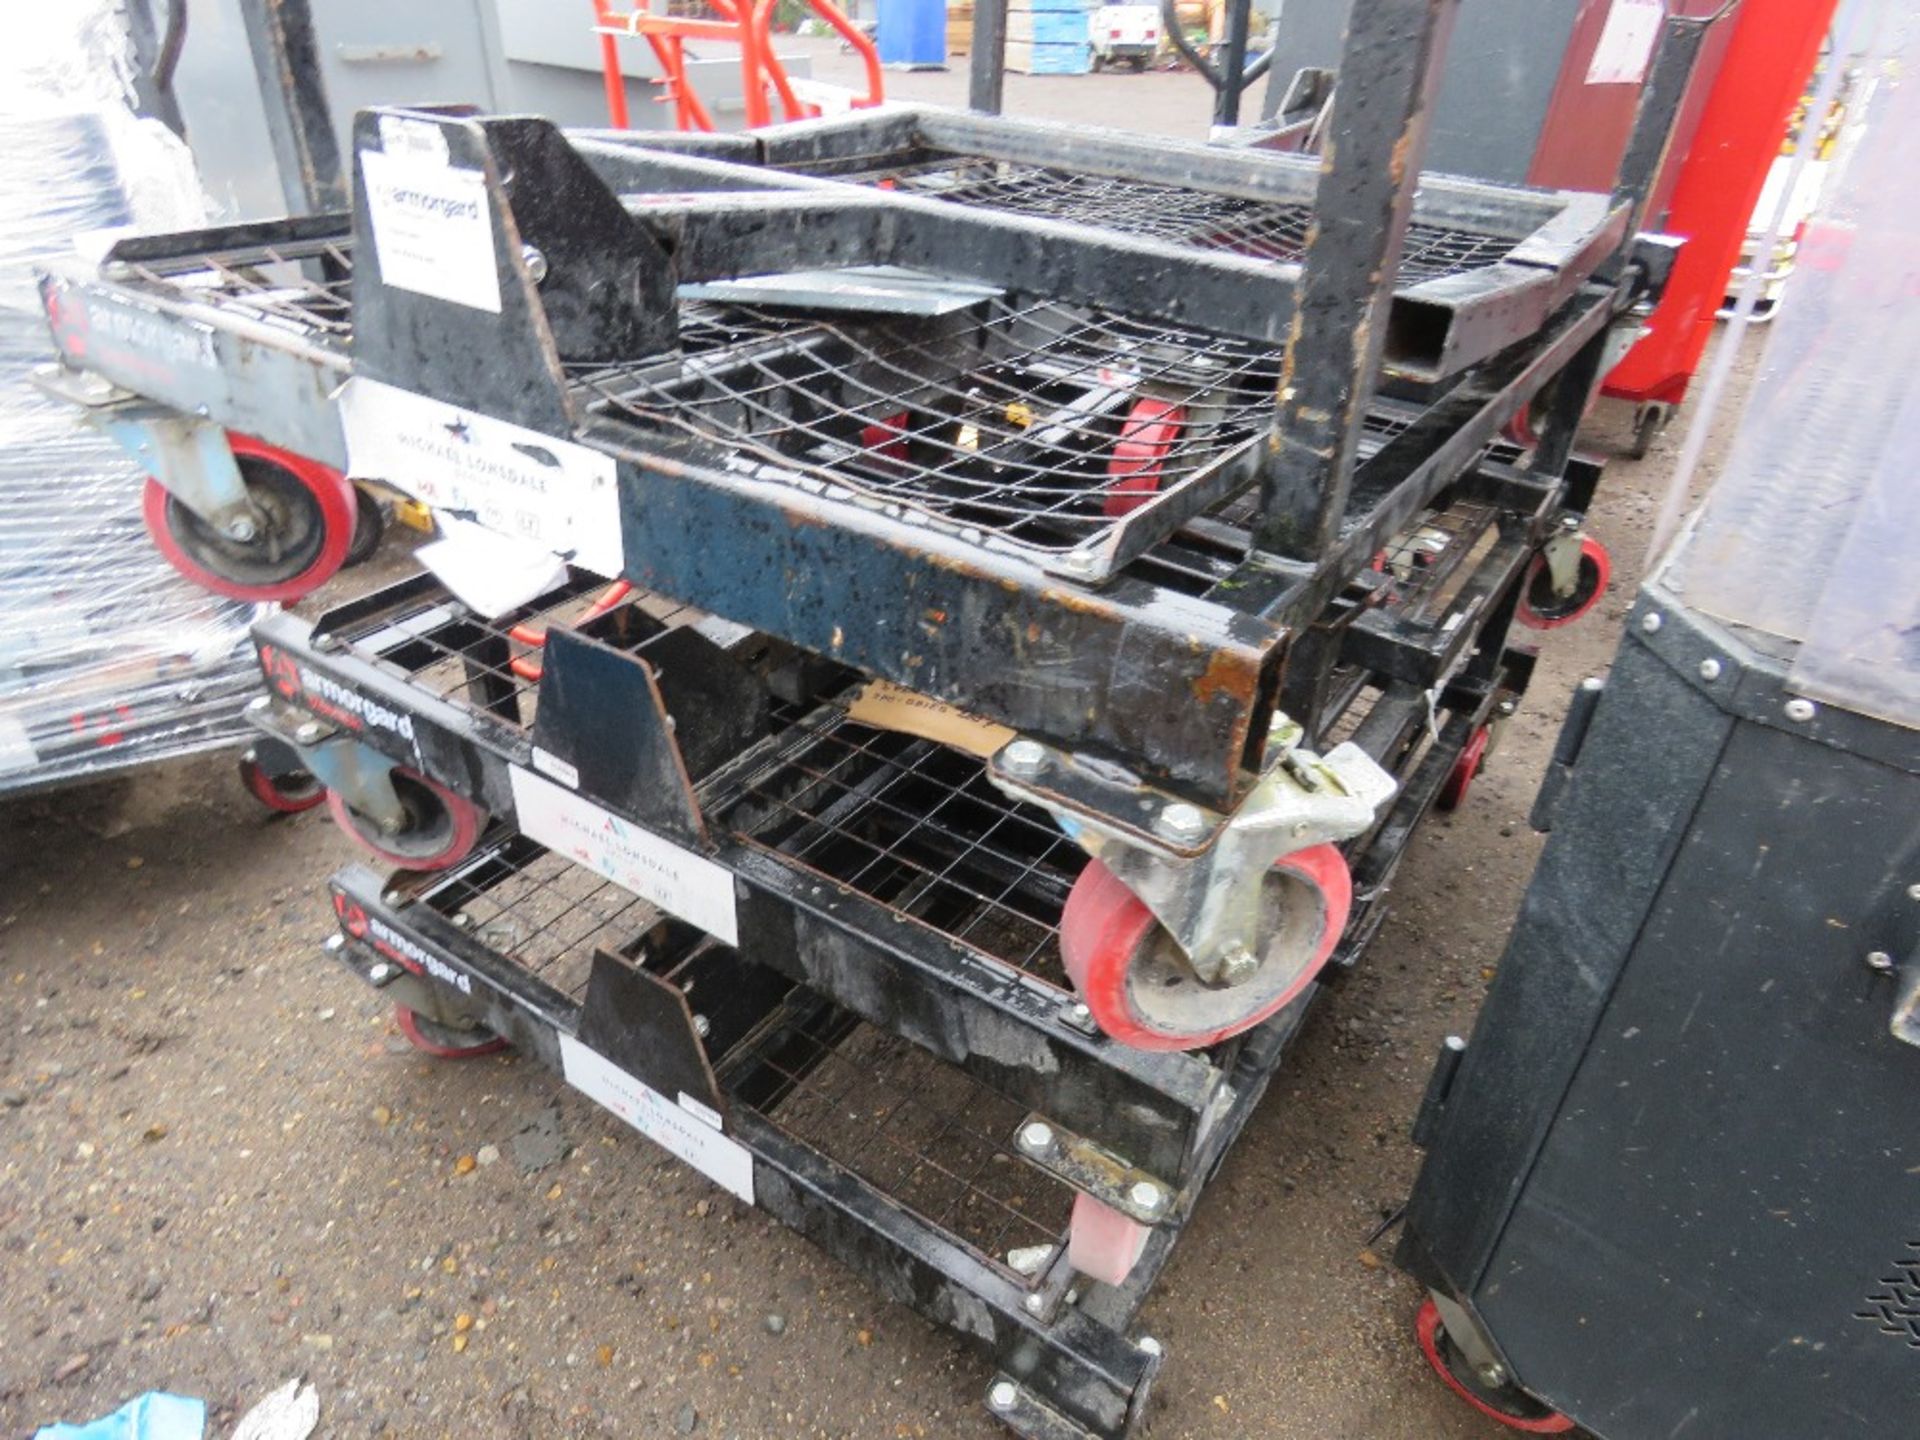 3 X ARMORGARD BUNDLE RACK TROLLEYS. SOURCED FROM LARGE CONSTRUCTION COMPANY LIQUIDATION. - Image 4 of 4